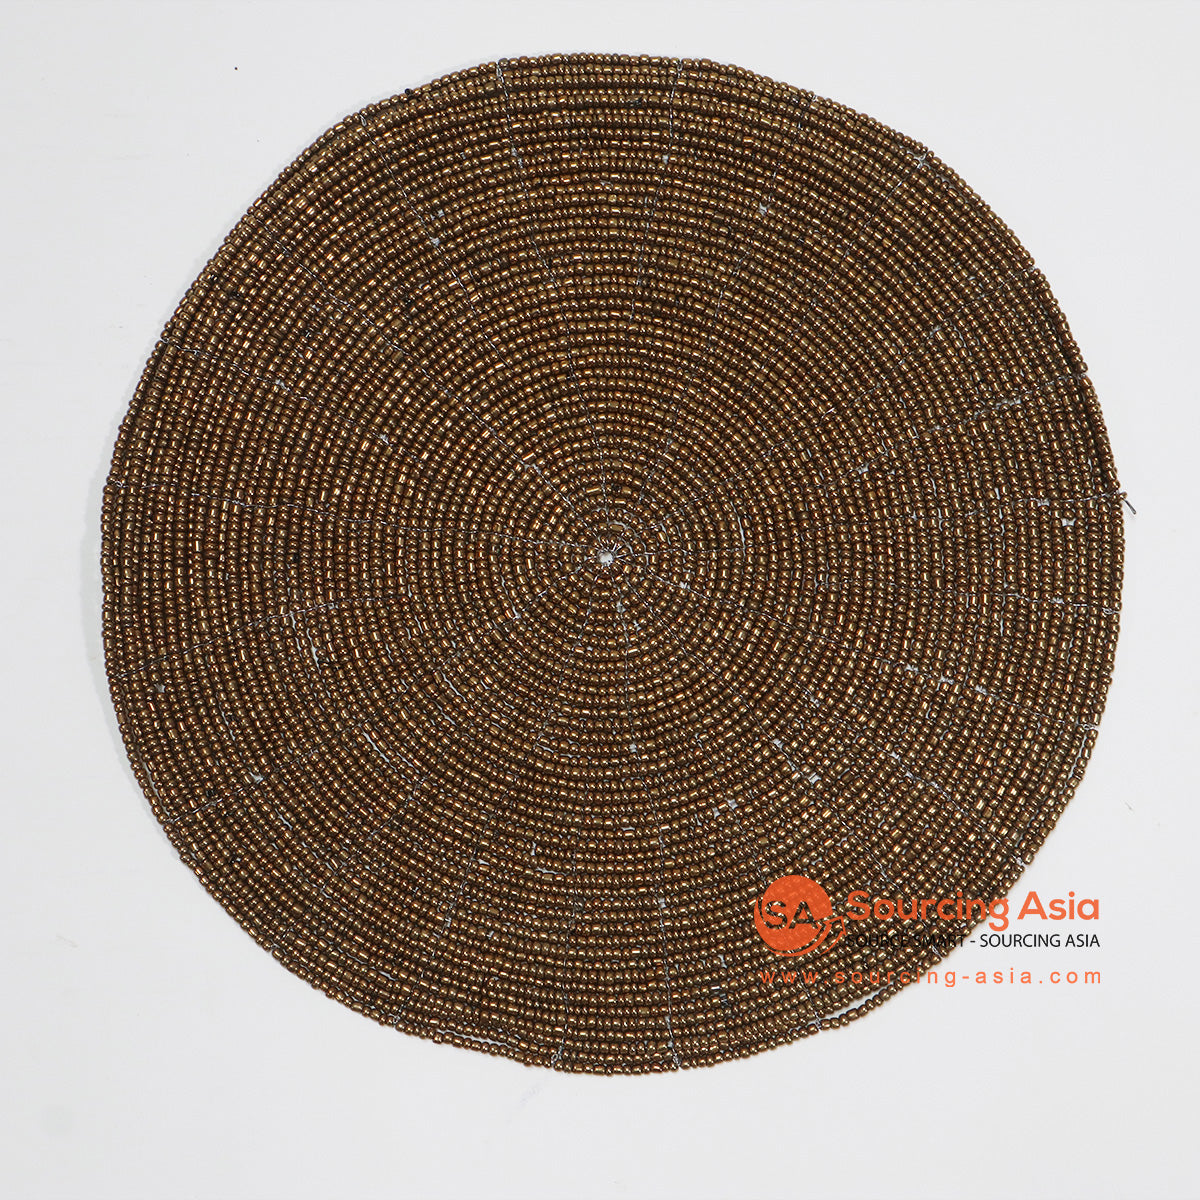 HBSC005-1 BROWN BEADED ROUND PLACEMAT